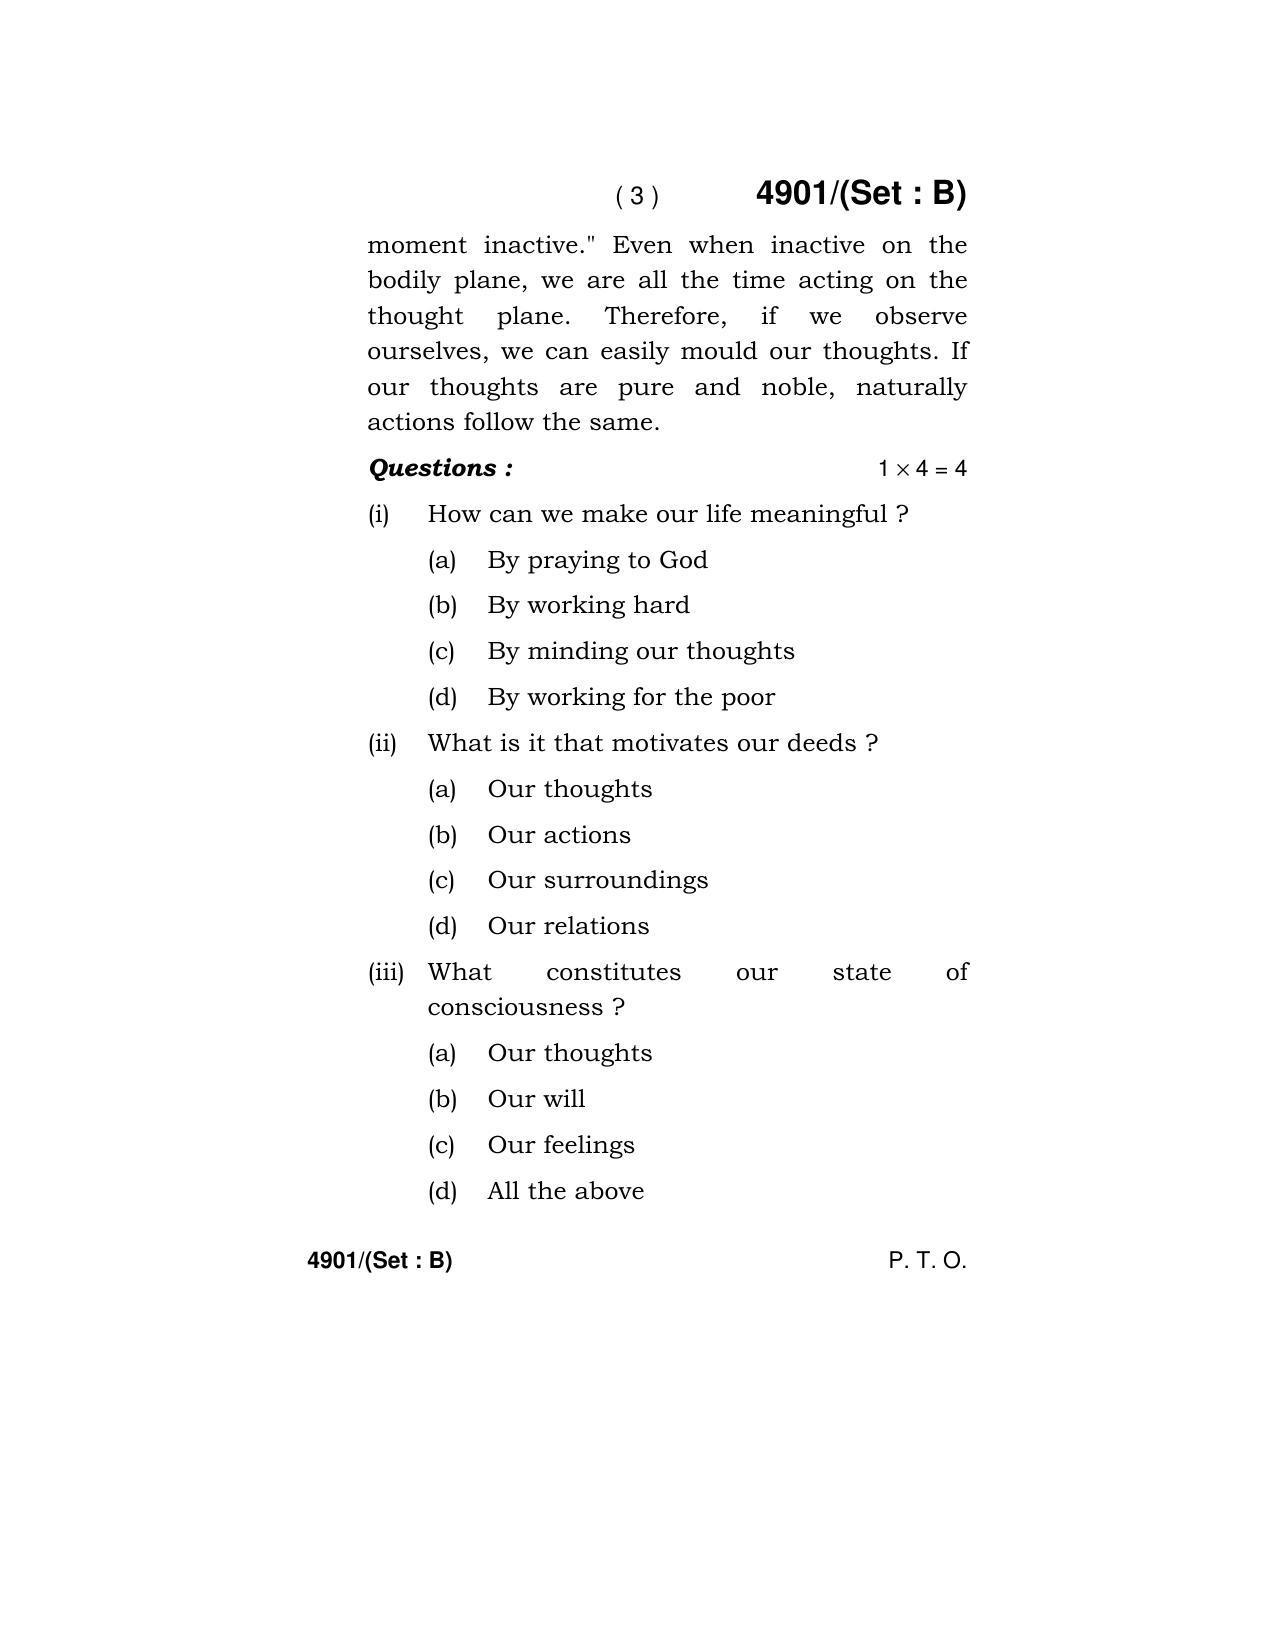 Haryana Board HBSE Class 12 English Core 2020 Question Paper - Page 19